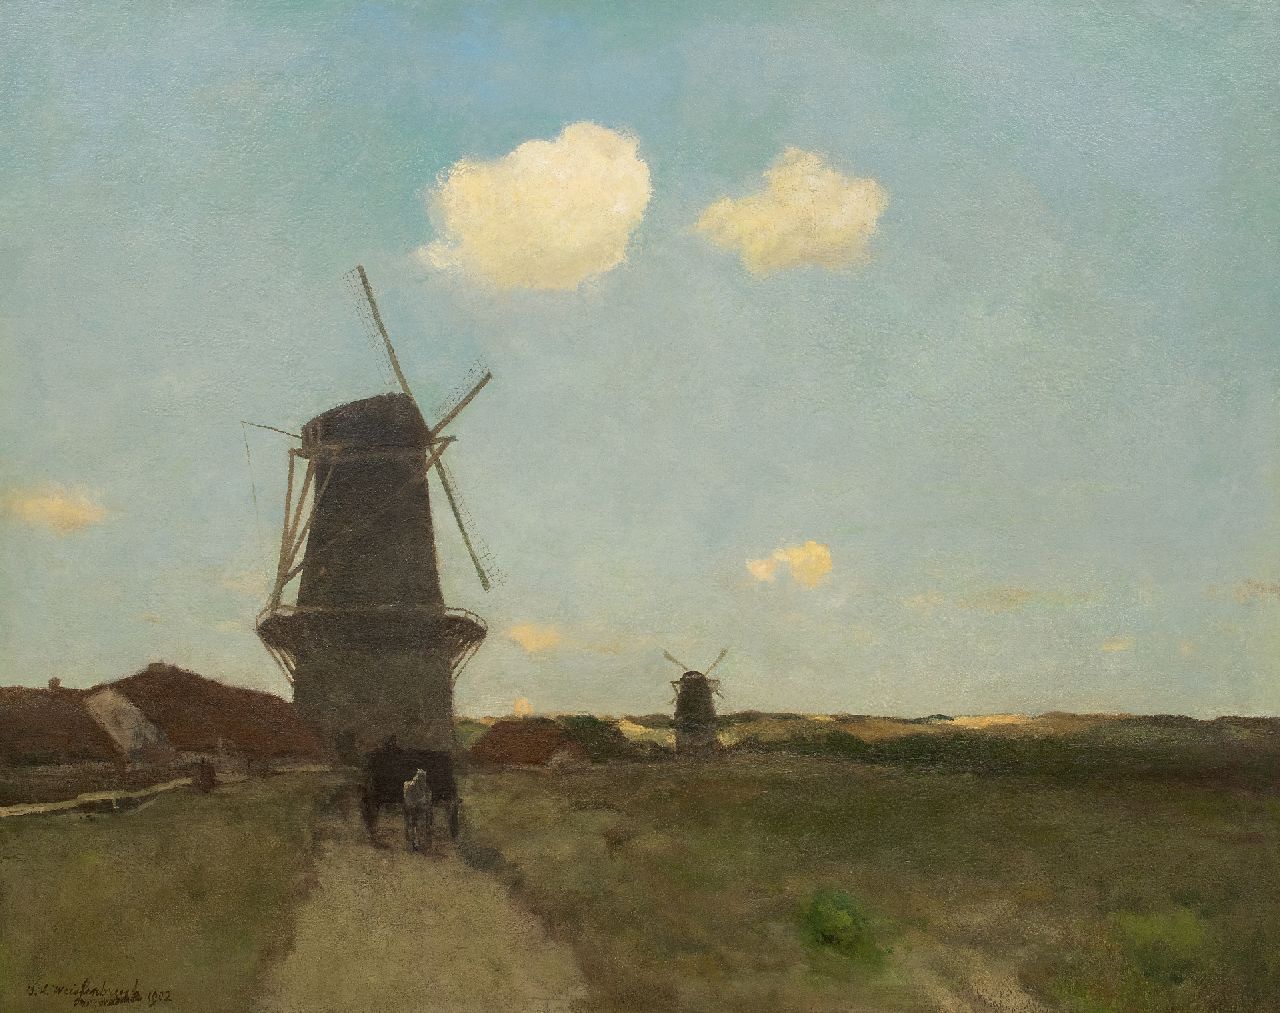 Weissenbruch H.J.  | Hendrik Johannes 'J.H.' Weissenbruch | Paintings offered for sale | Landscape with windmills, oil on canvas 103.0 x 128.8 cm, signed l.l. and dated 1902